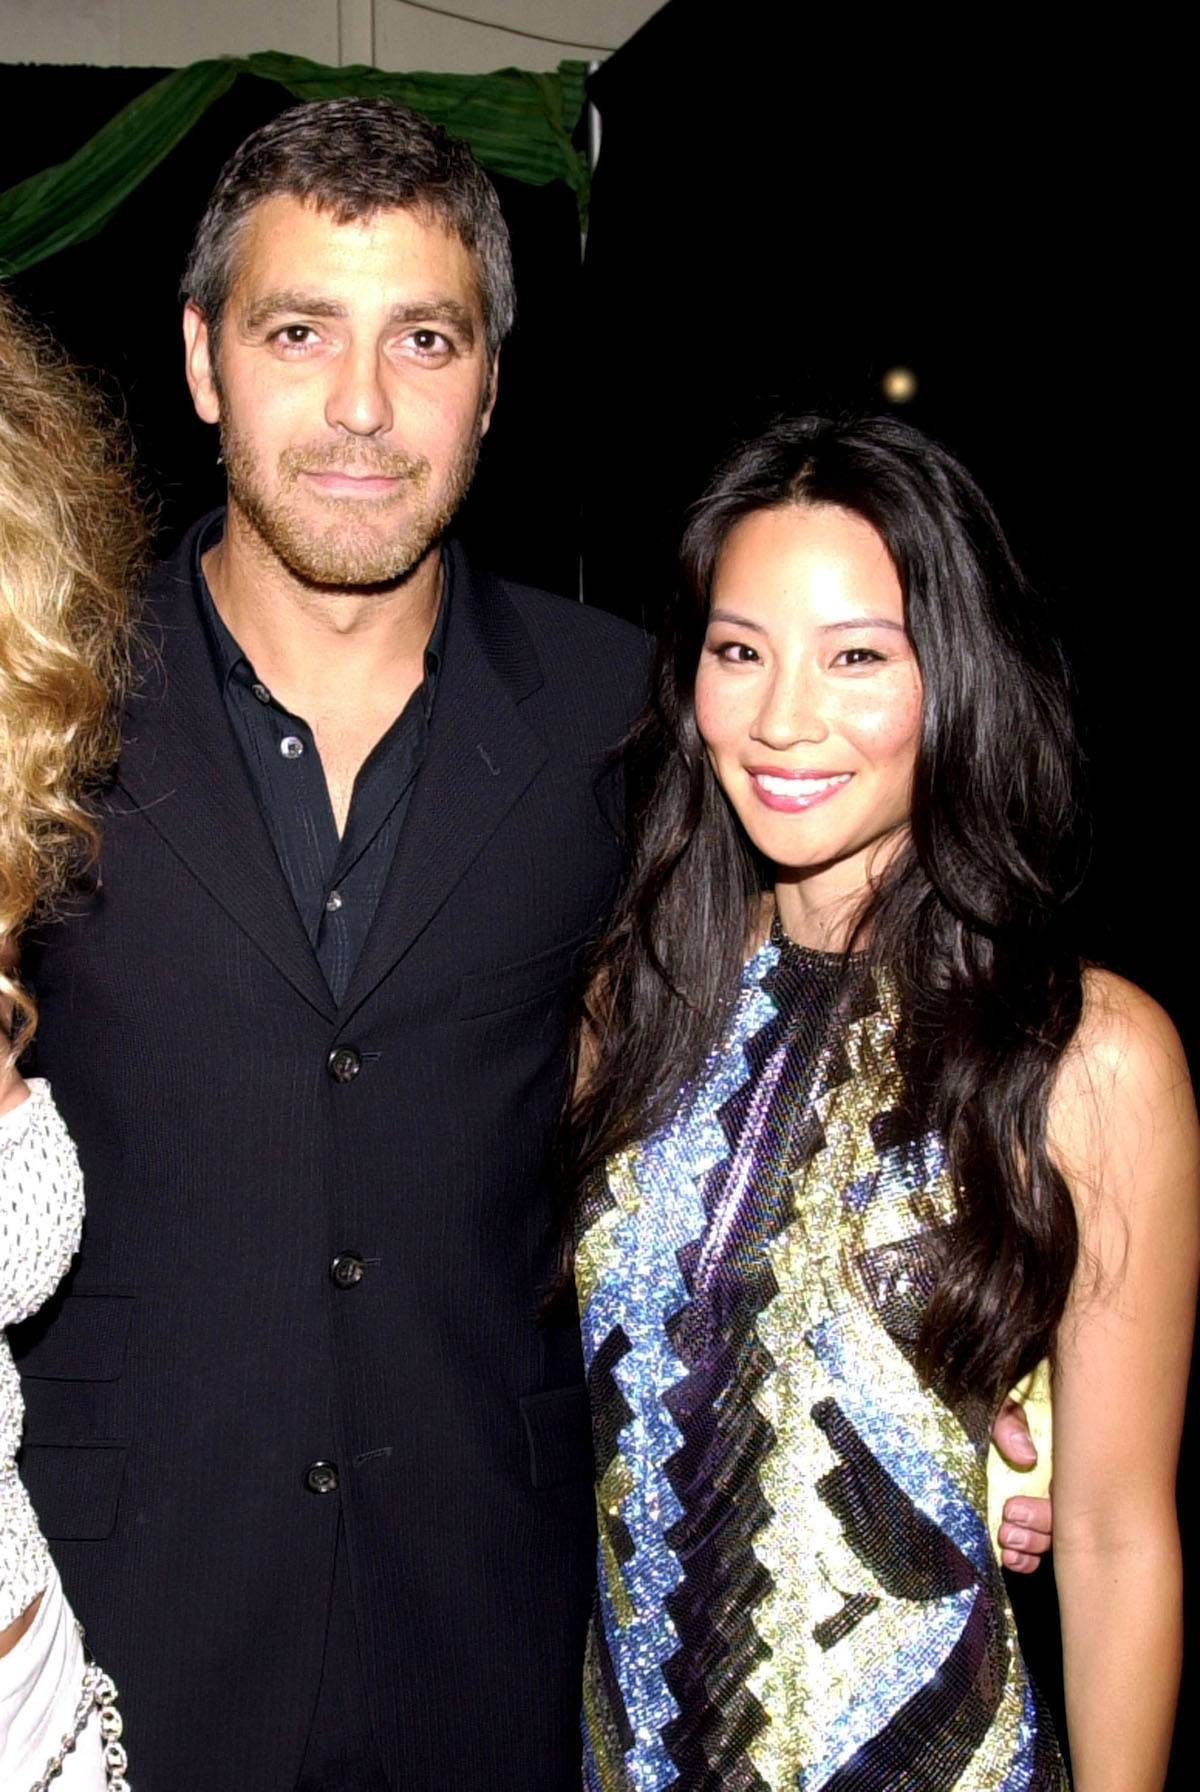 Lucy Liu i George Clooney (Fot. Getty Images)